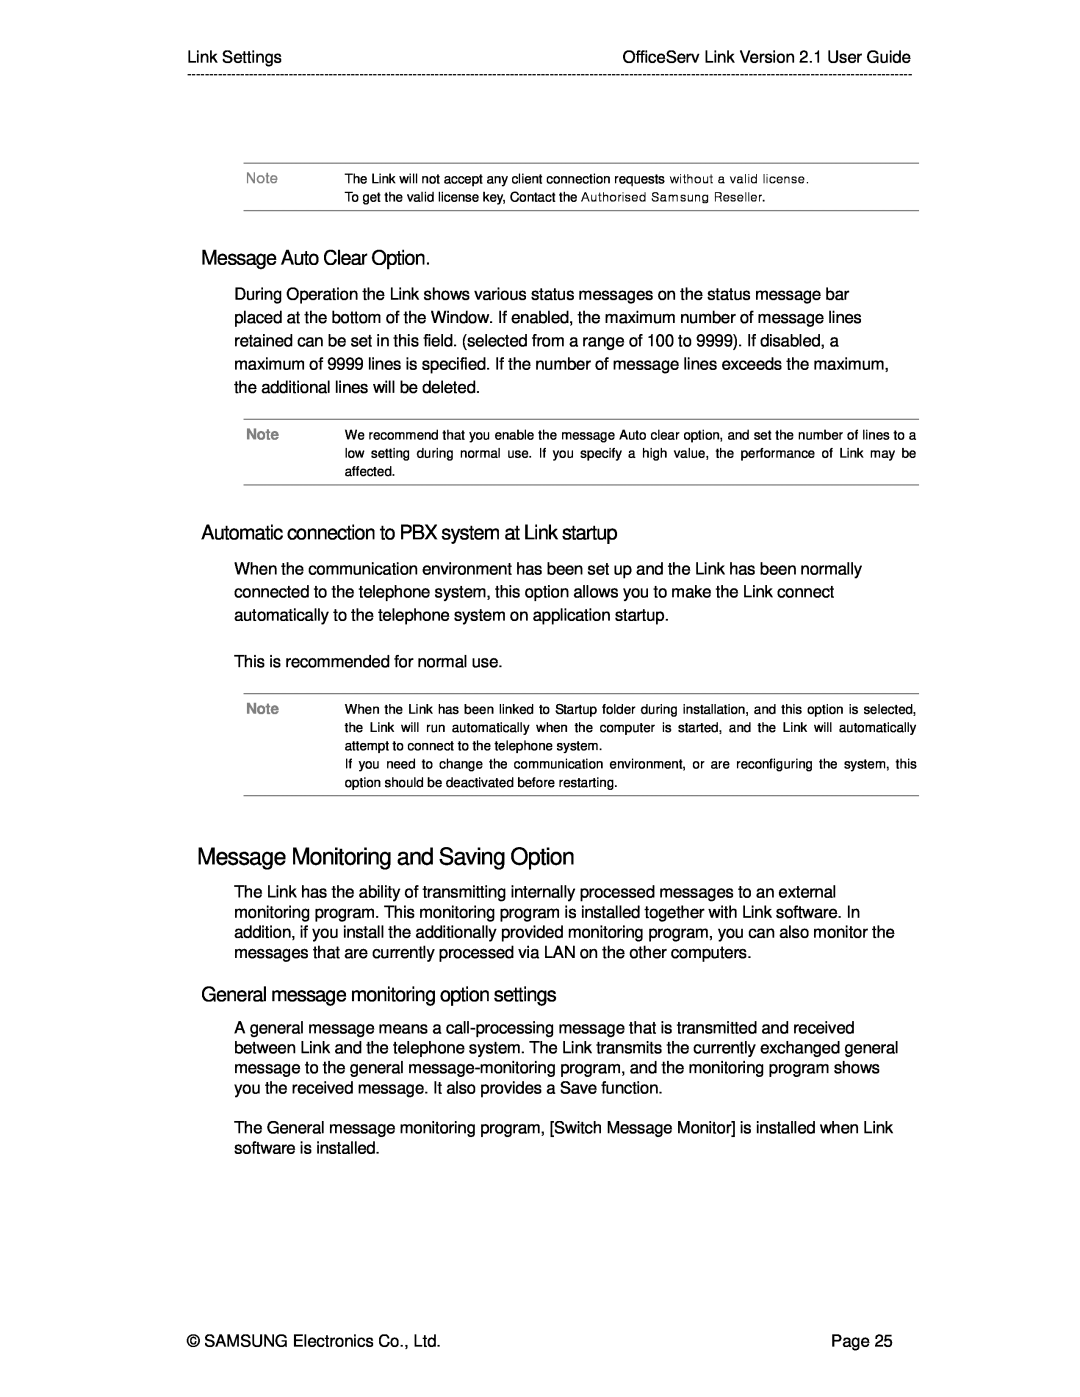 Samsung Version 2.1 manual Message Monitoring and Saving Option, Message Auto Clear Option 